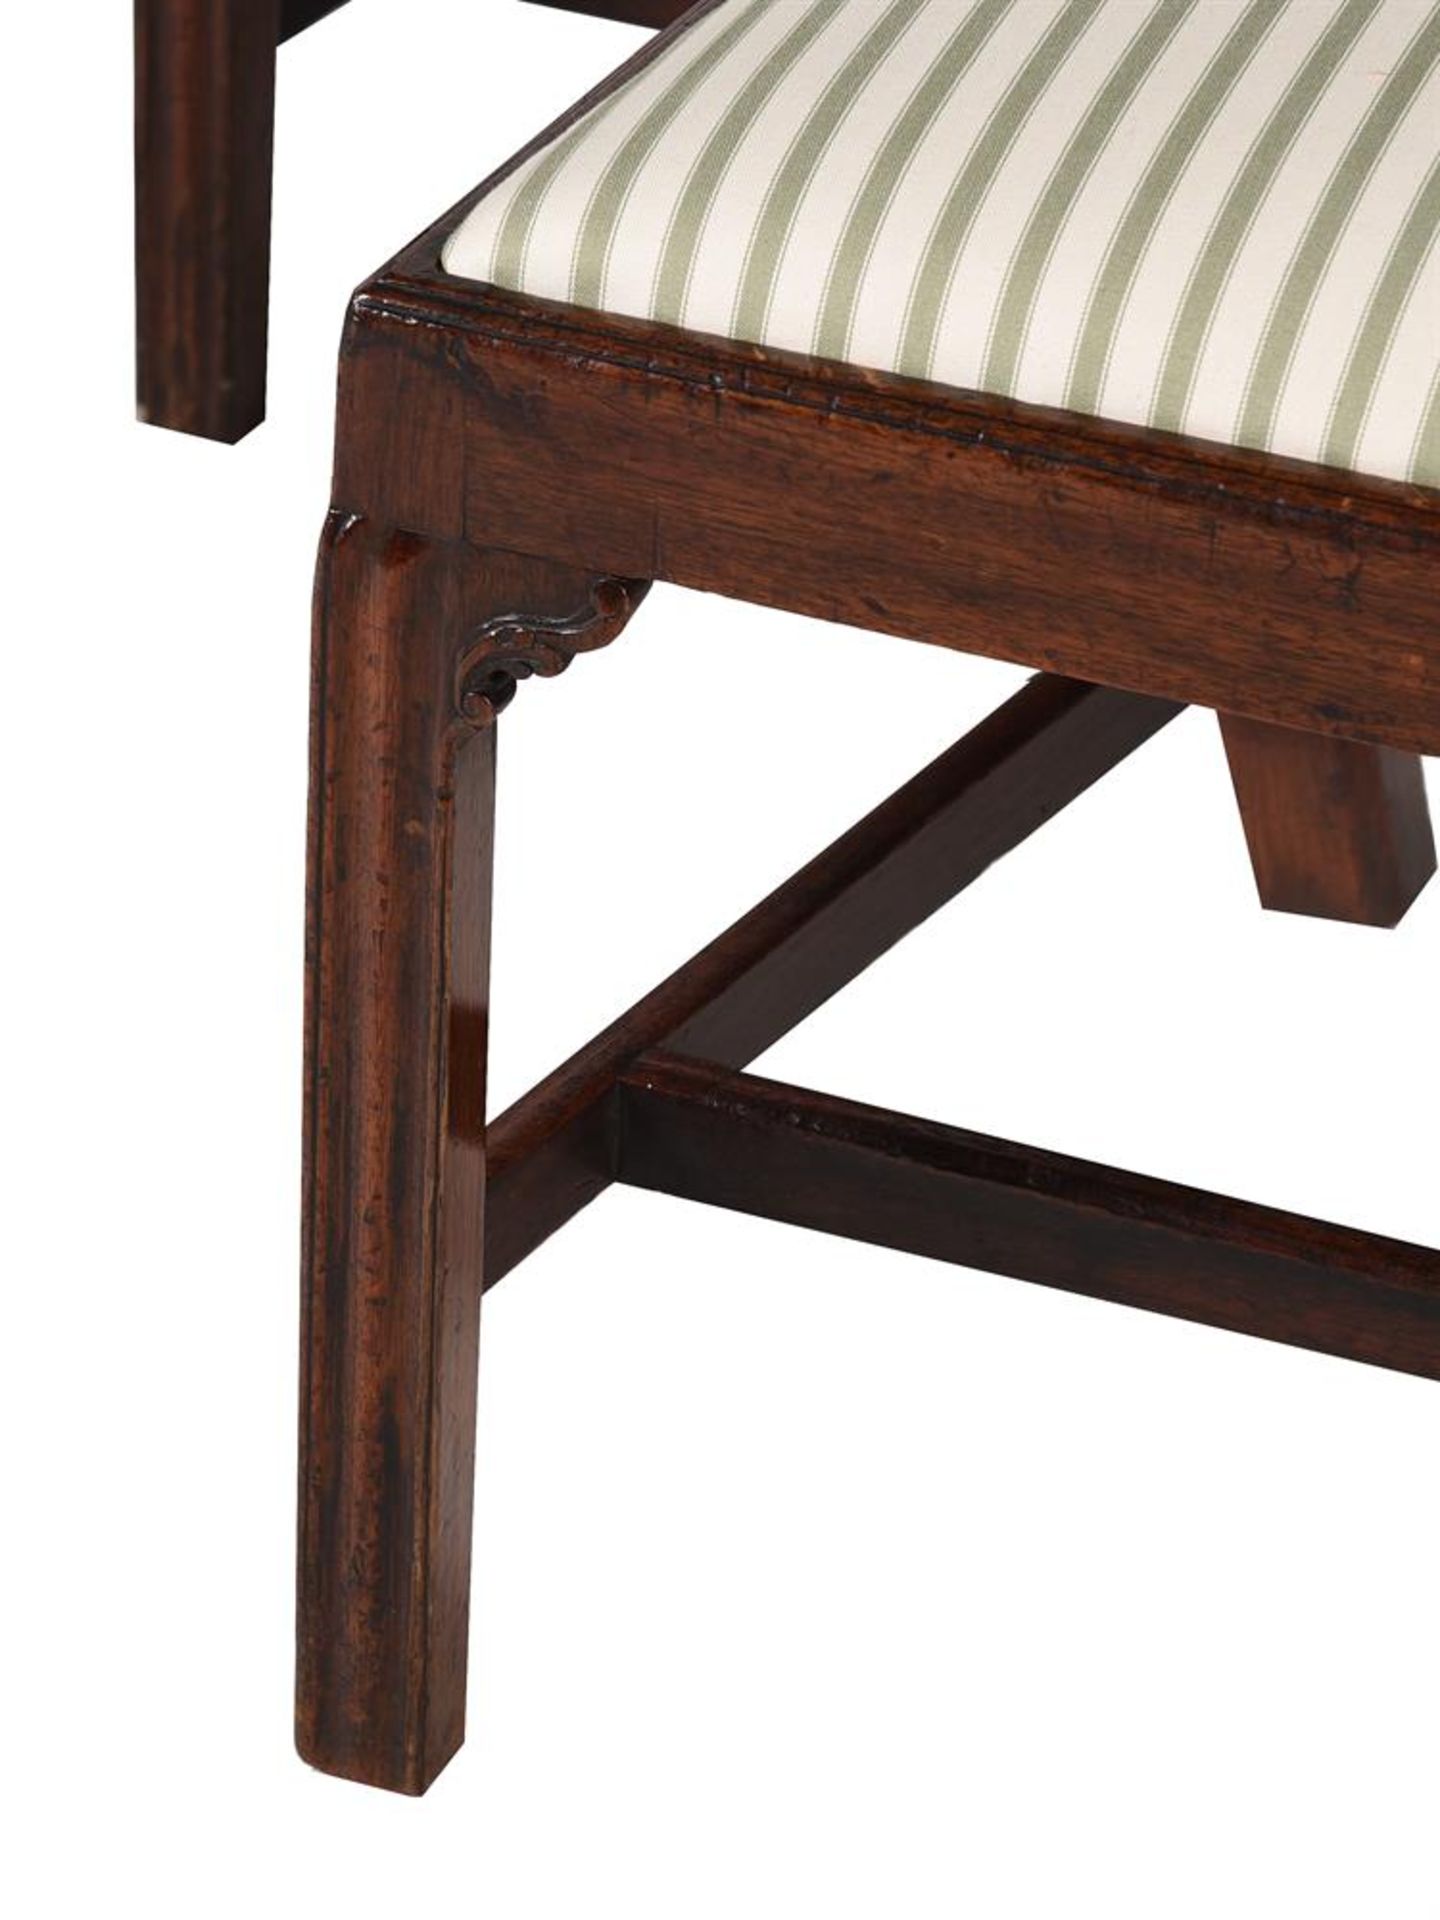 A SET OF SIX GEORGE III MAHOGANY DINING CHAIRS, IN THE MANNER OF THOMAS CHIPPENDALE, CIRCA 1770 - Image 3 of 3